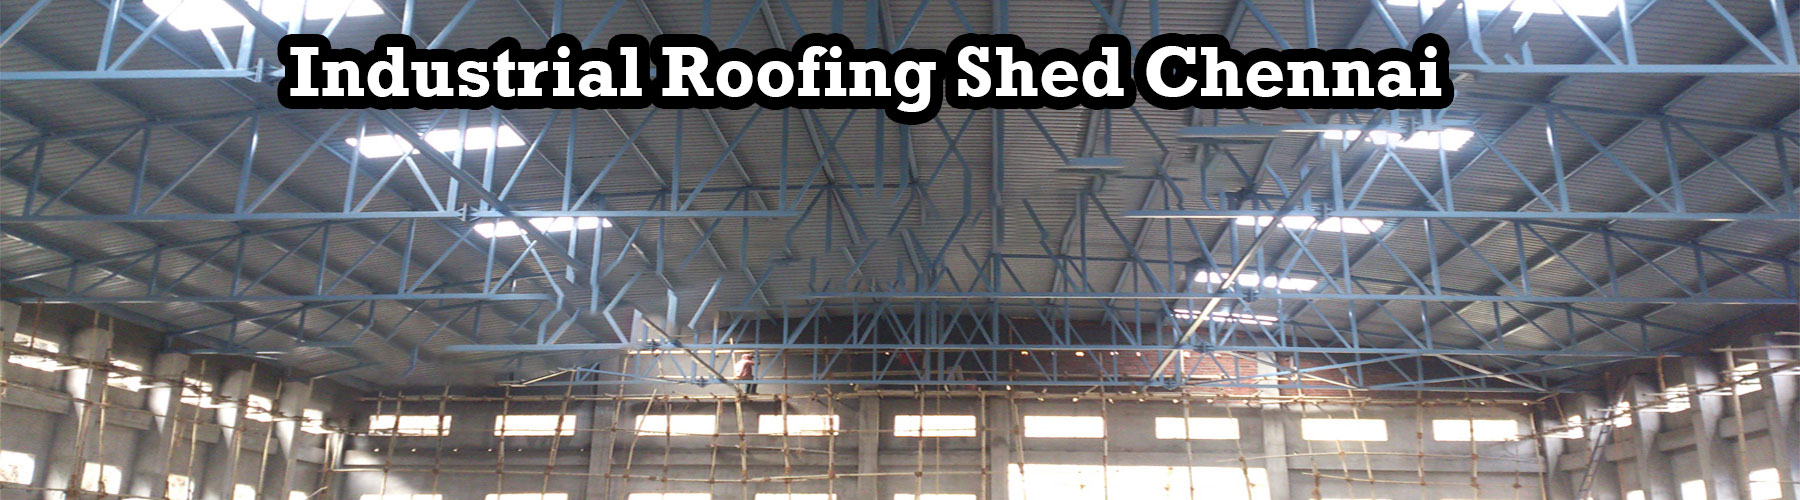 Industrial Roofing Shed Chennai